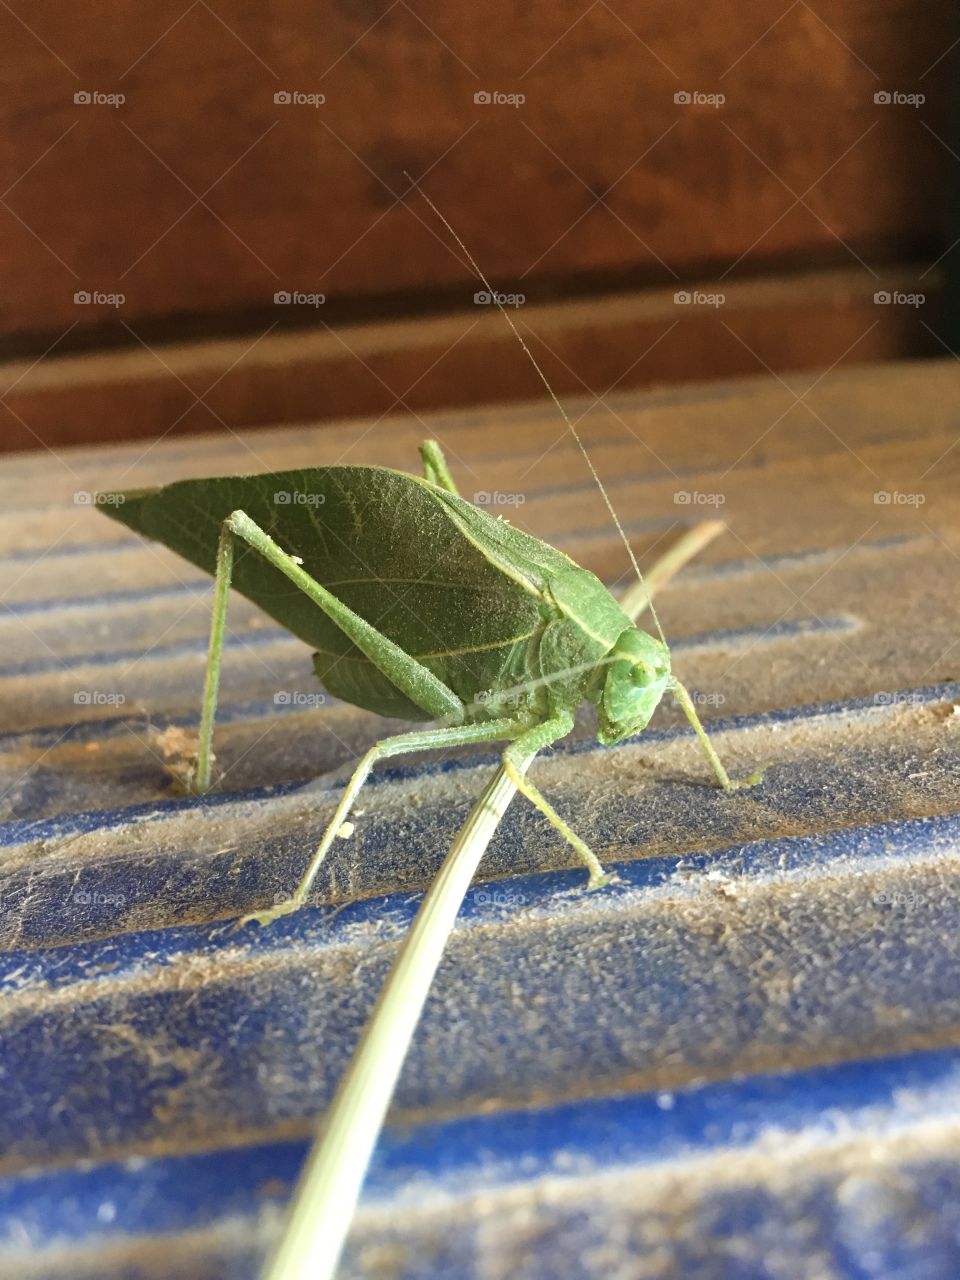 a bug that I don’t know what it is. I call it leaf bug. It was pretty cool and creepy at the same time. 